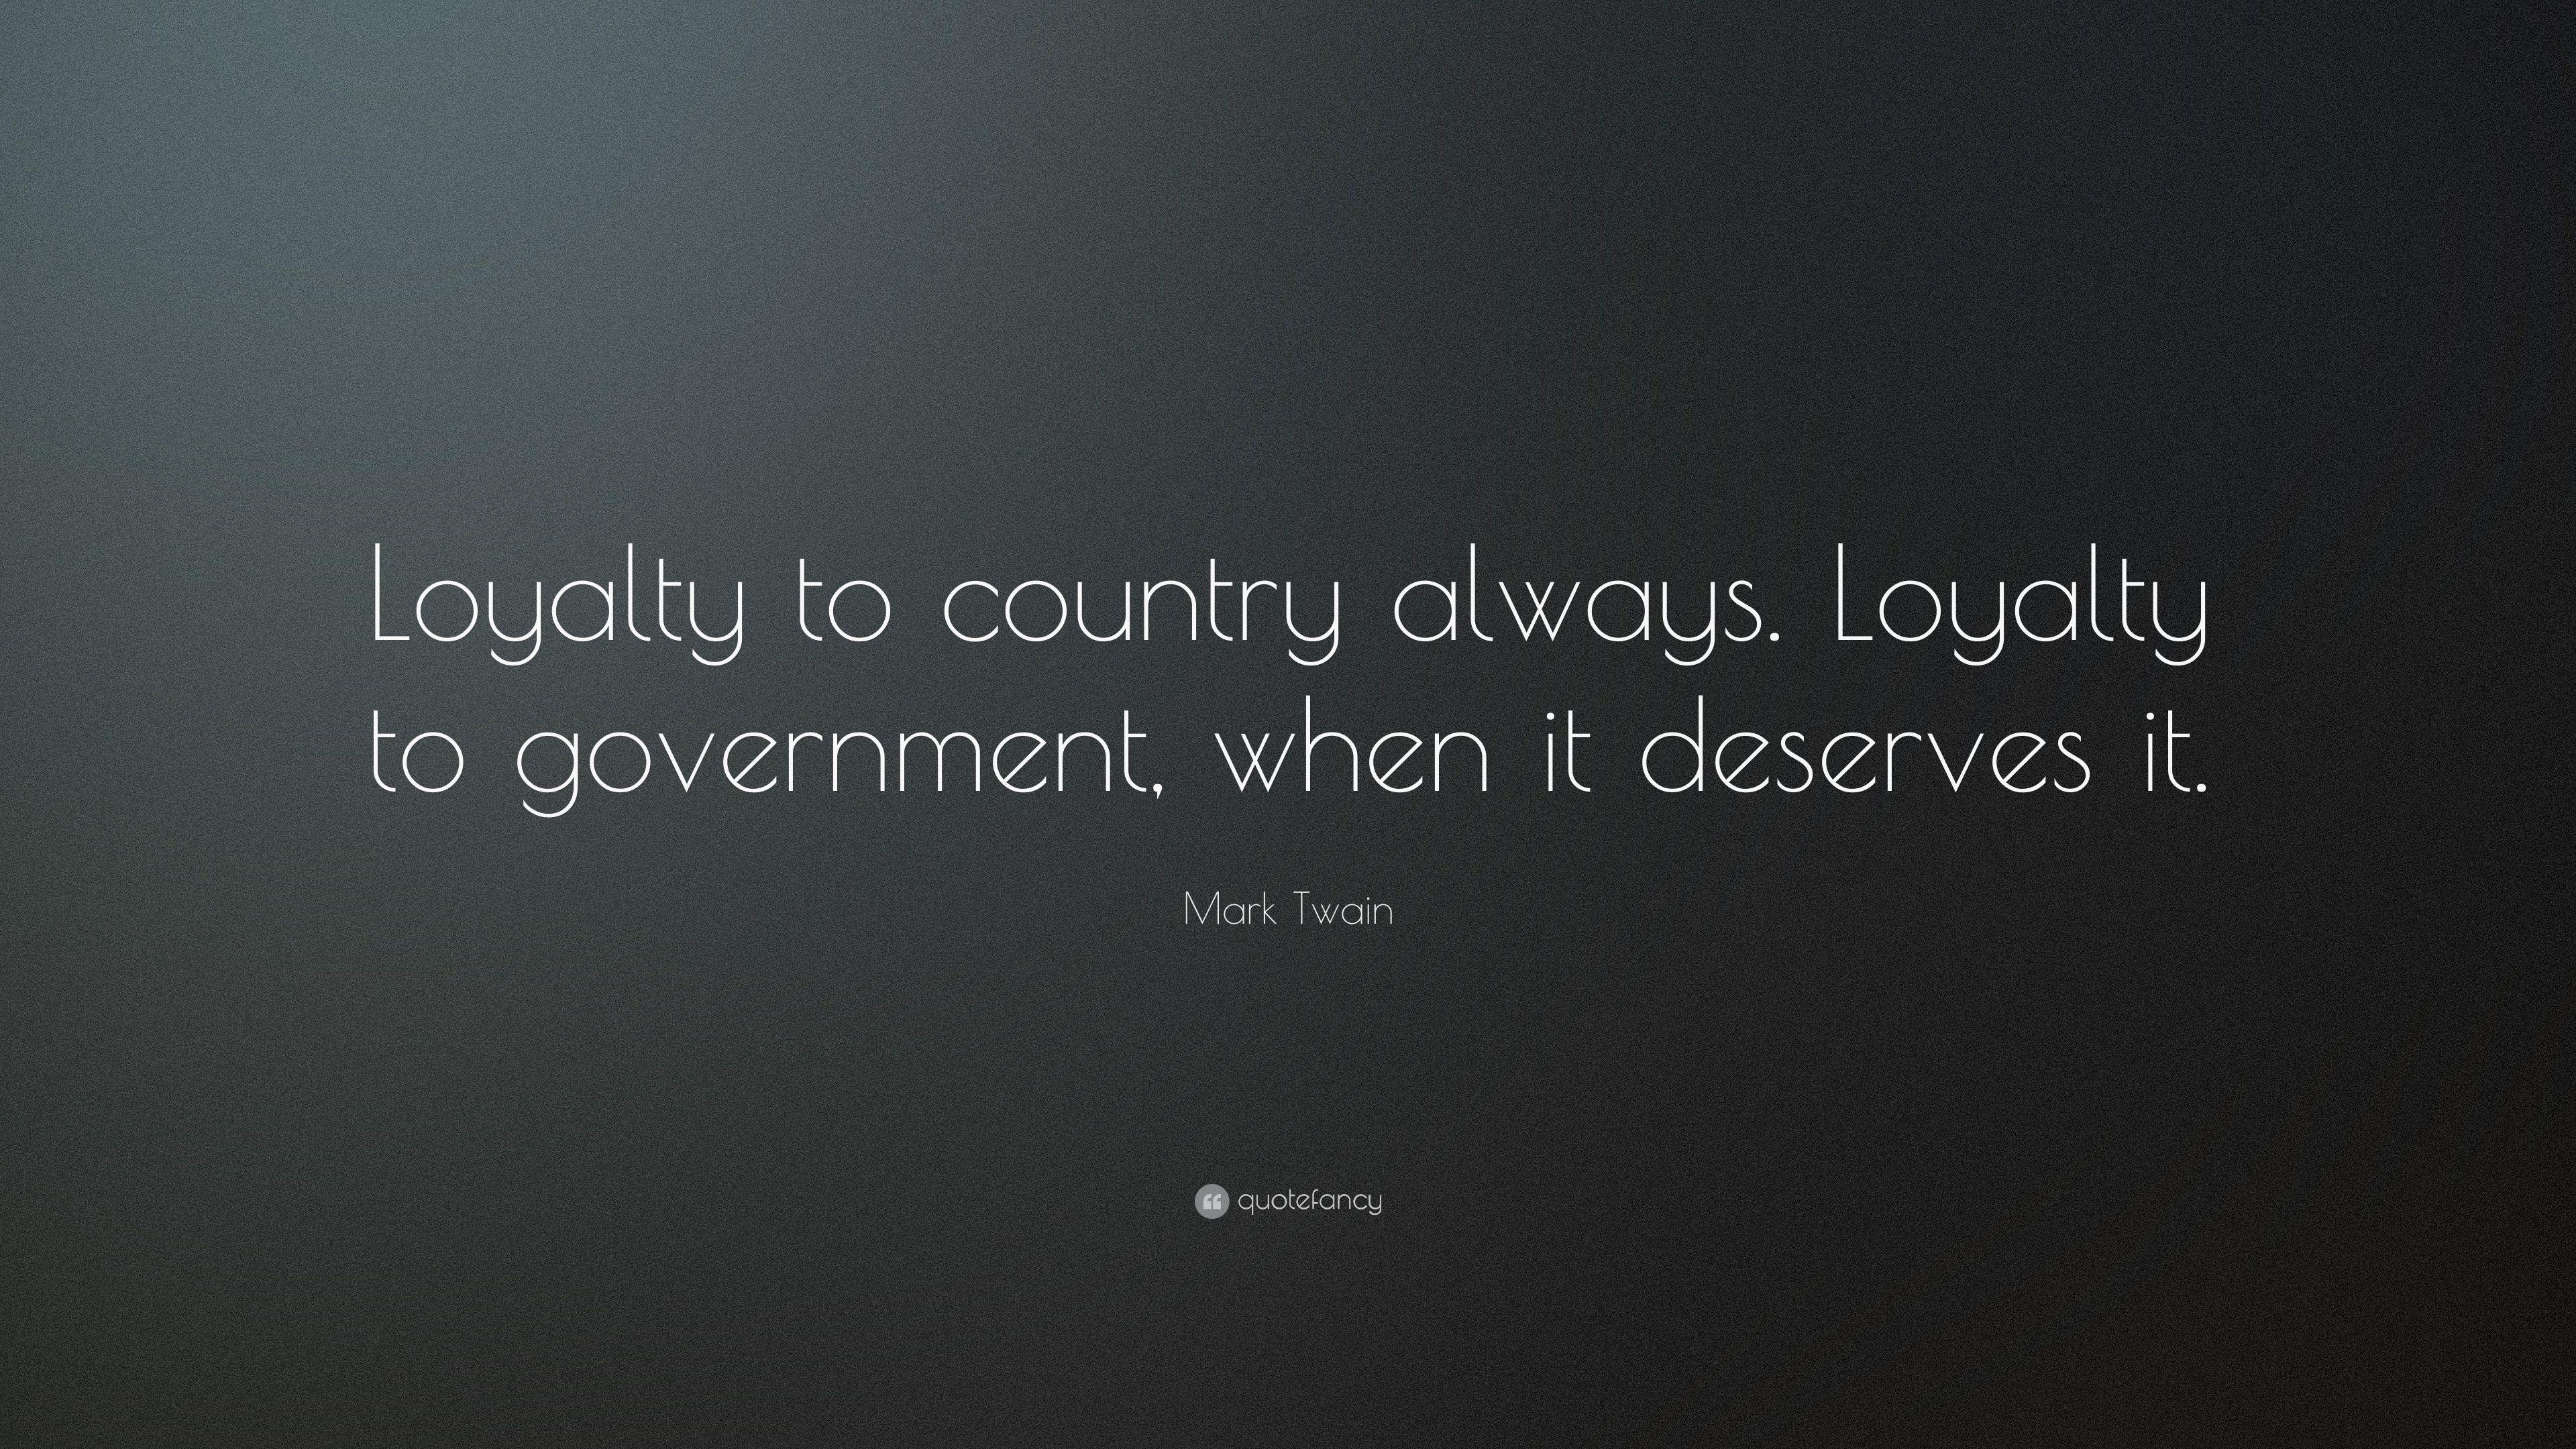 Mark Twain Quote: “Loyalty to country always. Loyalty to